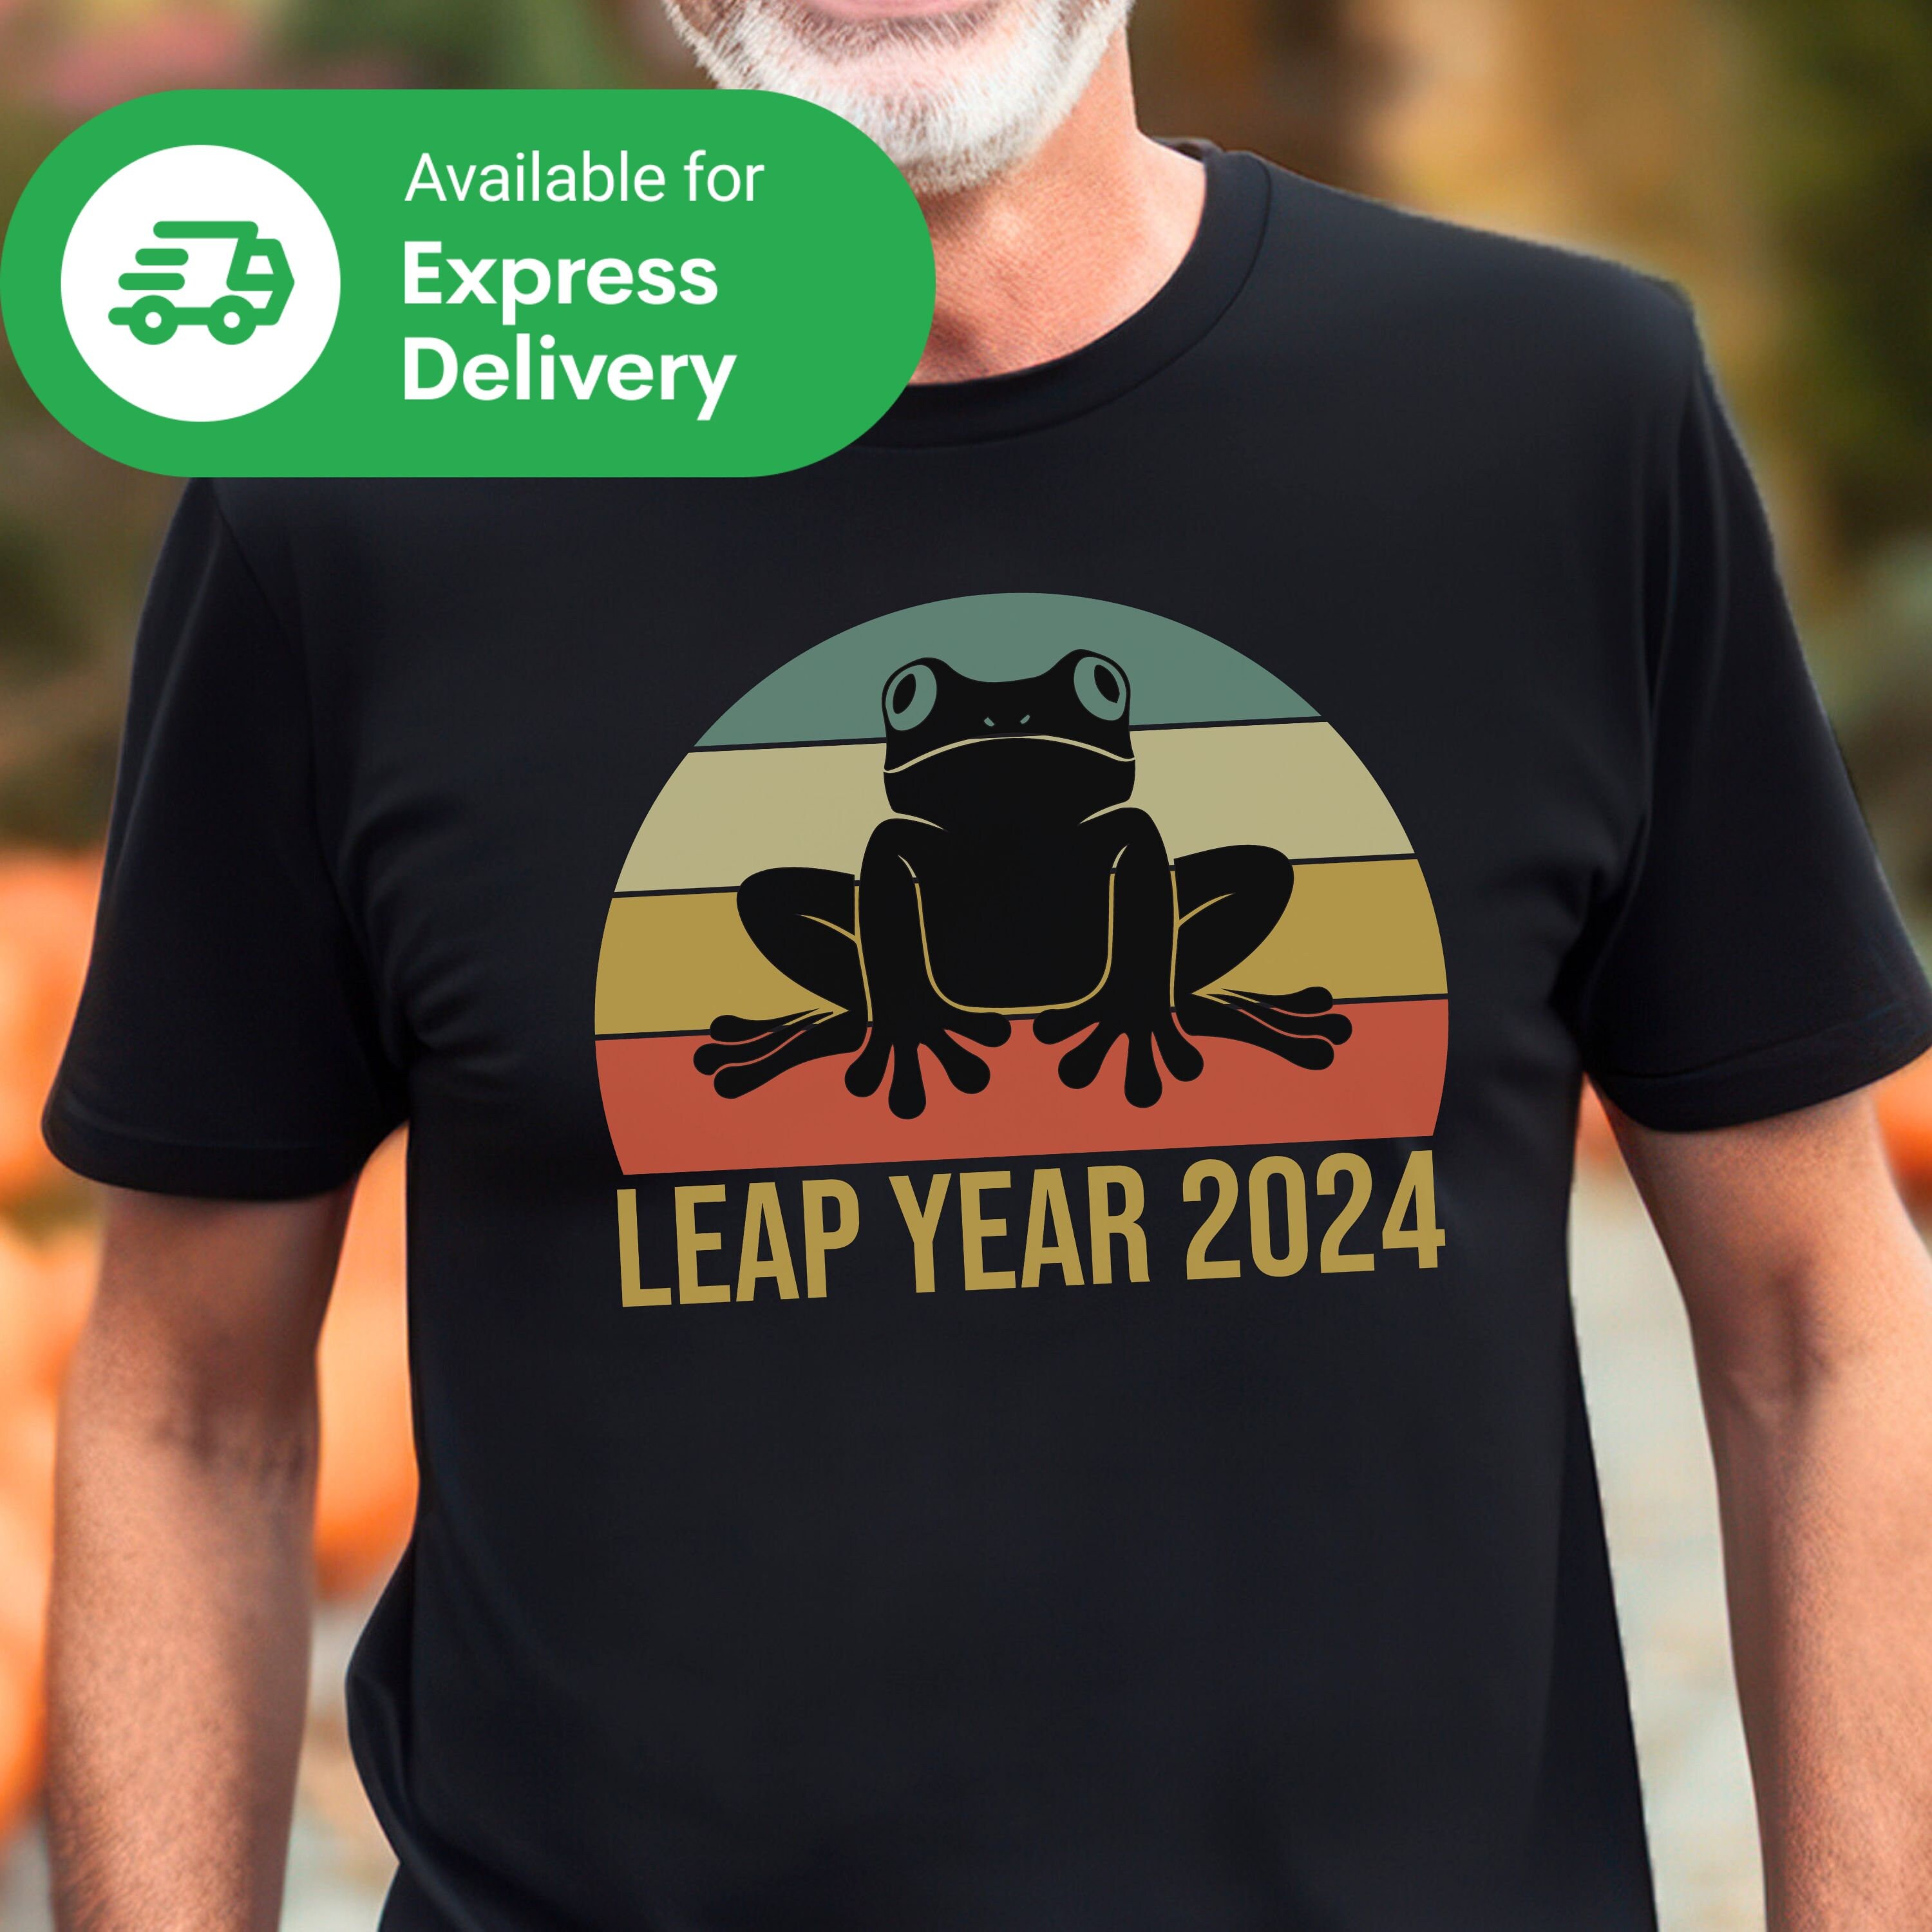 Leap Year 2024 Frog Shirt, Leap Birthday Gift, Happy New Year T-Shirt, Leap Day Gift, Hello 2024 T-Shirt, New Year Gift, New Years Shirt